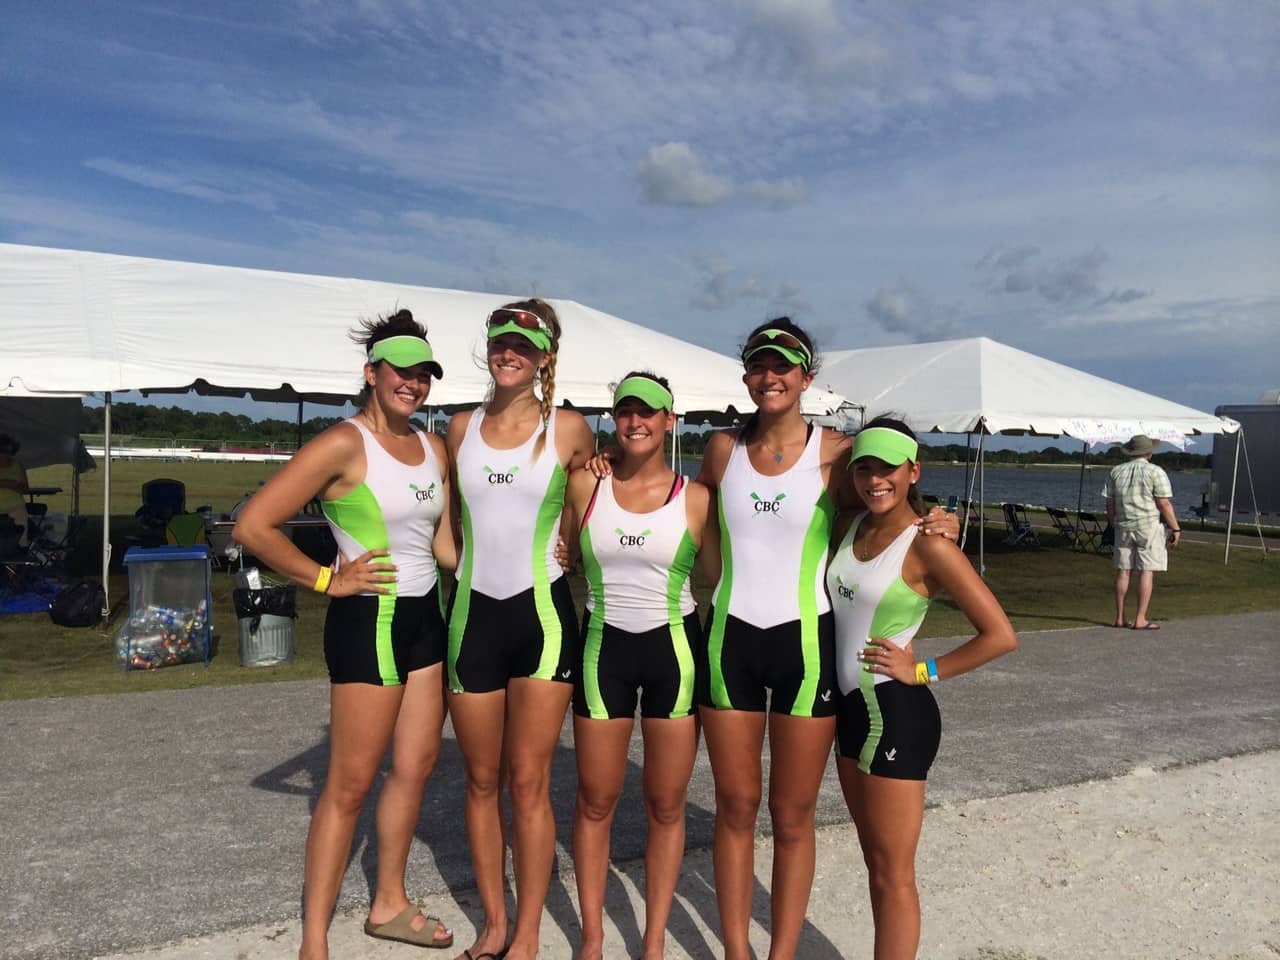 Connecticut Boat Club rowers (left to right) Natalie Puente, Kaitlyn Kynast, Casey Clifford, Julie Cornacchia and Kassy Boliakis finished fourth Sunday at the USRowing Youth National Championships in Florida.